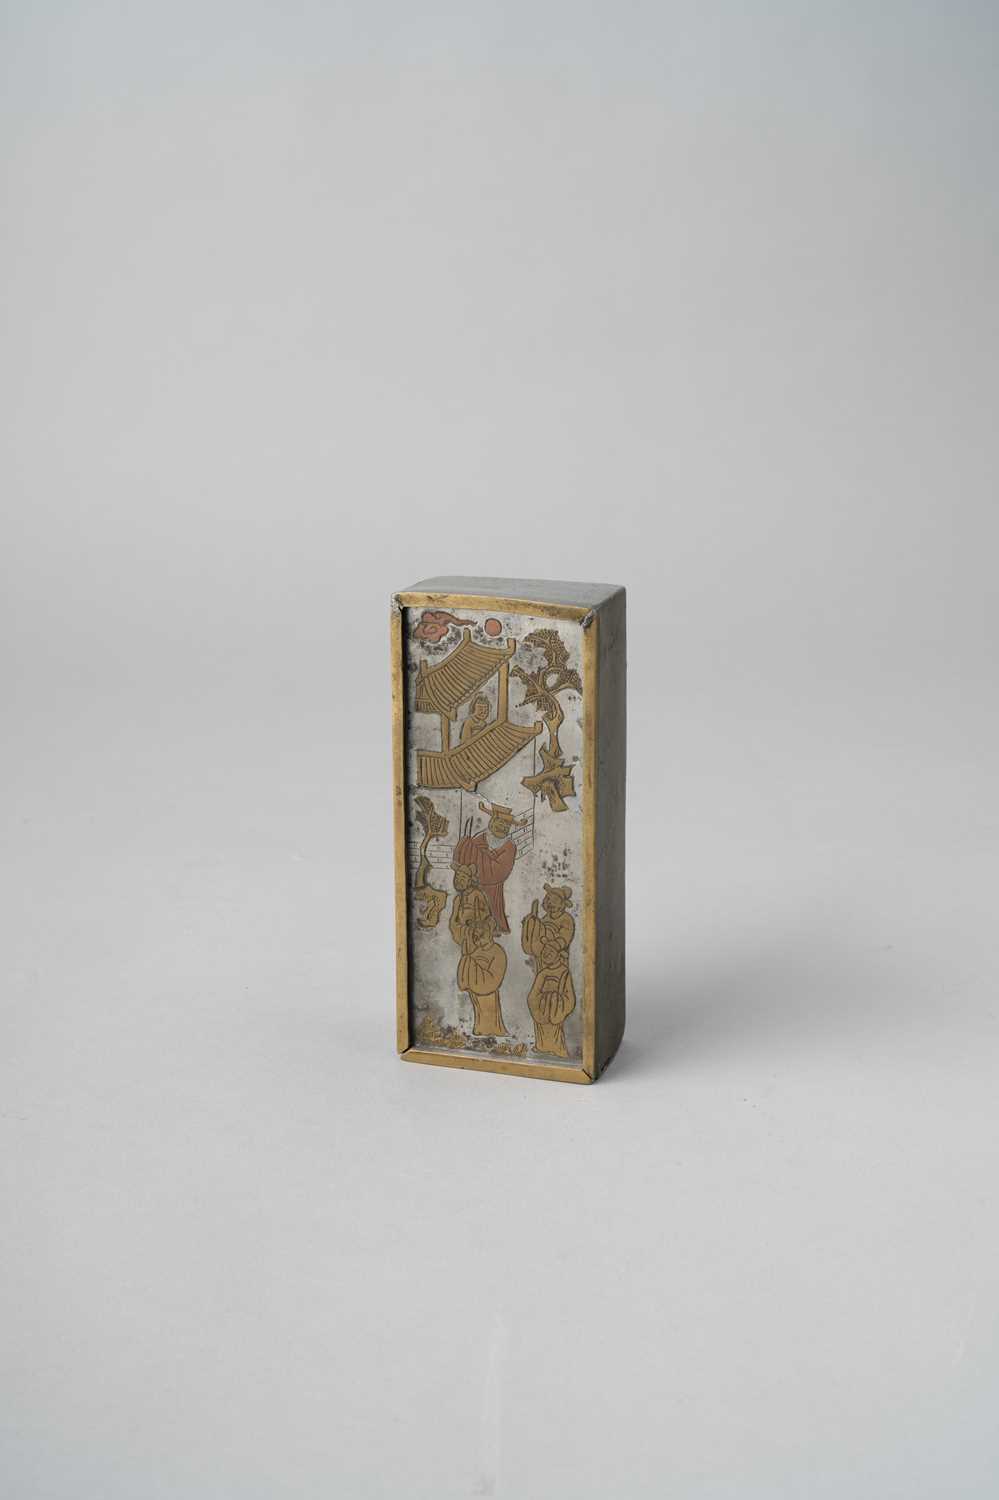 A CHINESE MIXED METAL RECTANGULAR BOX 17TH CENTURY Decorated with copper and brass inlay on a pewter